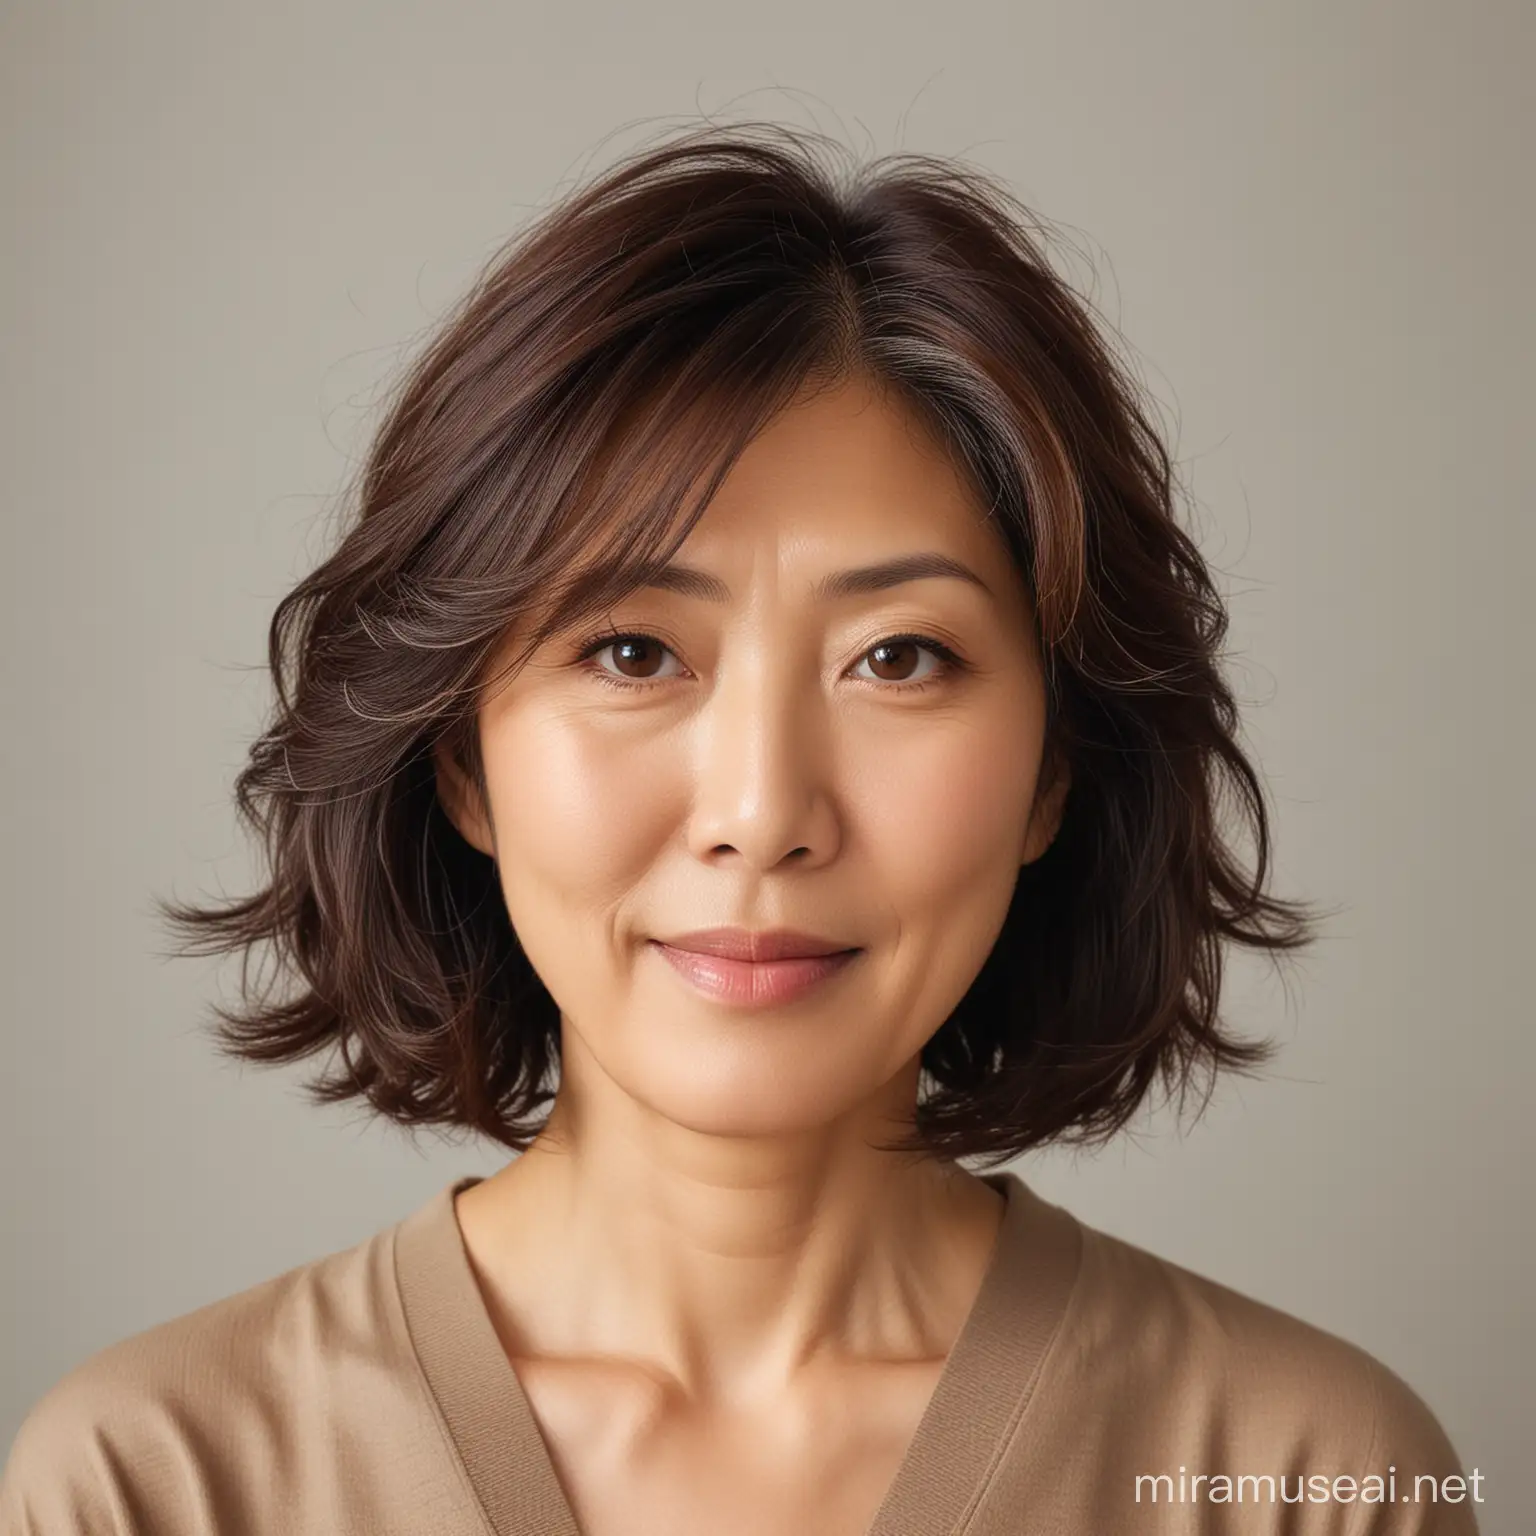 A Japanese woman in her fifties with wavy dark brown hair, neck-length and caramel-colored eyes.